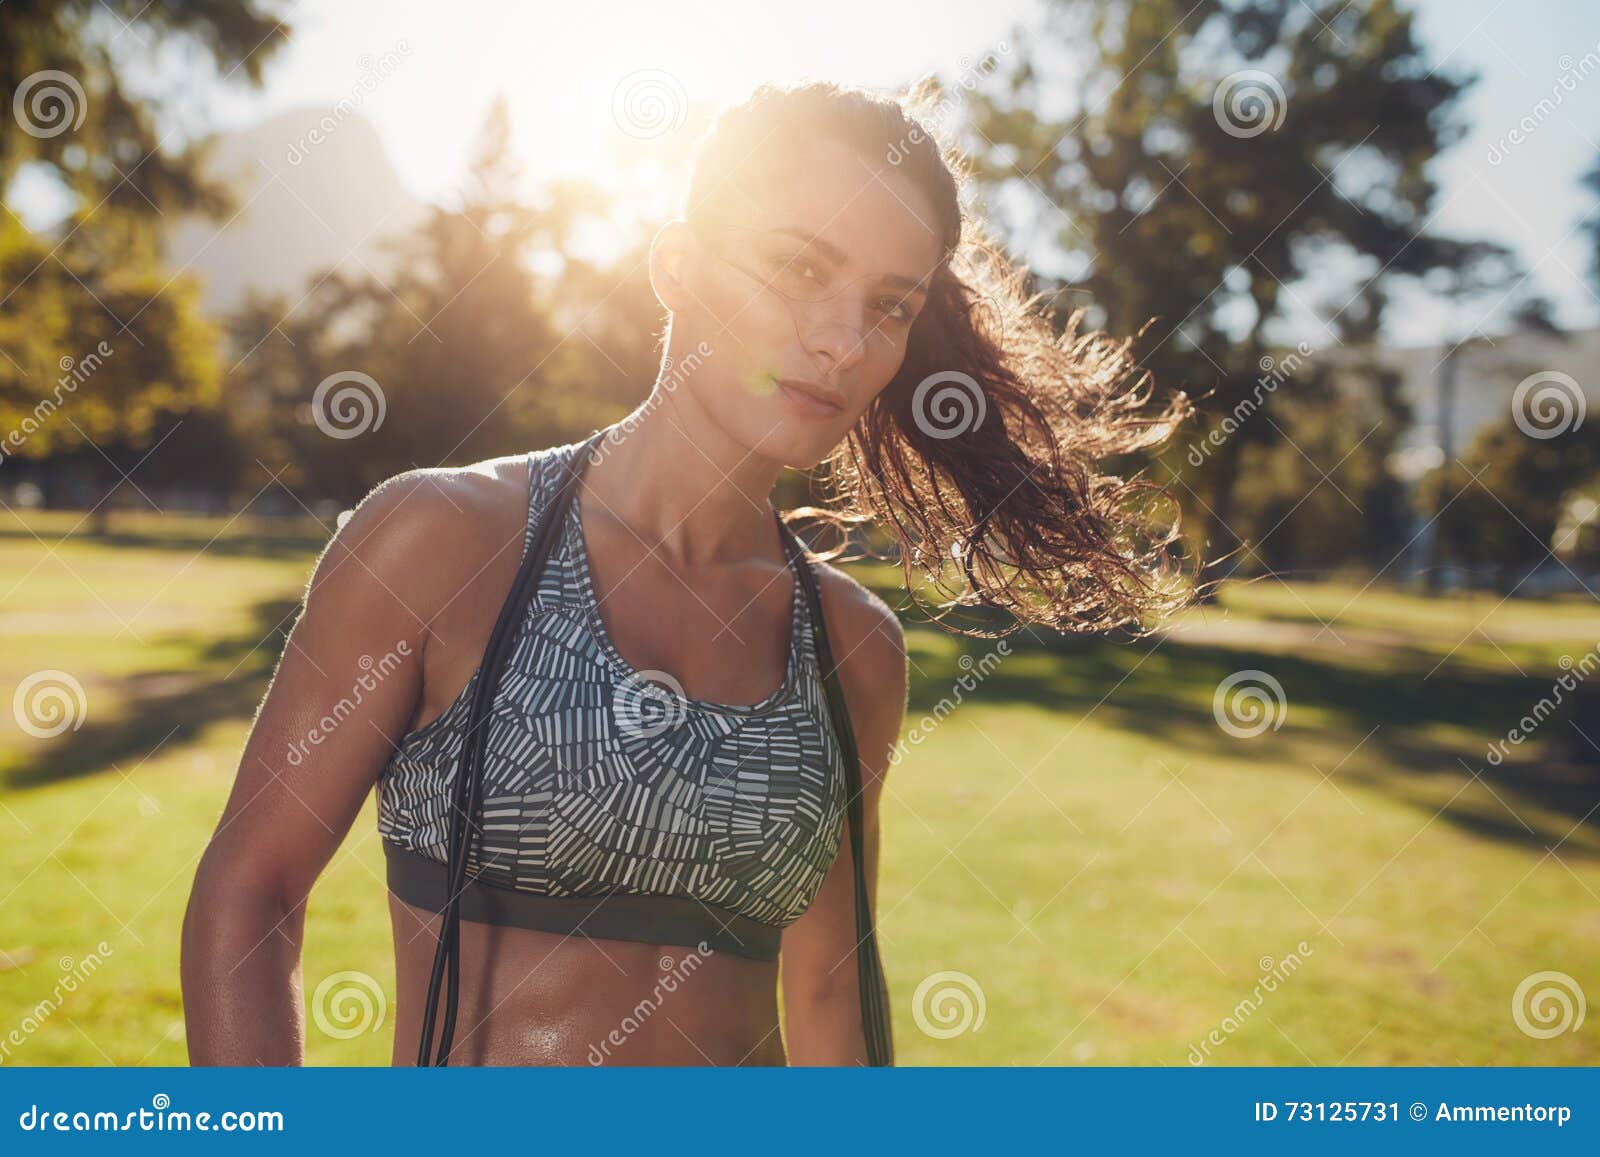 https://thumbs.dreamstime.com/z/healthy-young-woman-park-skipping-rope-portrait-sports-bra-around-her-neck-female-athlete-taking-break-73125731.jpg